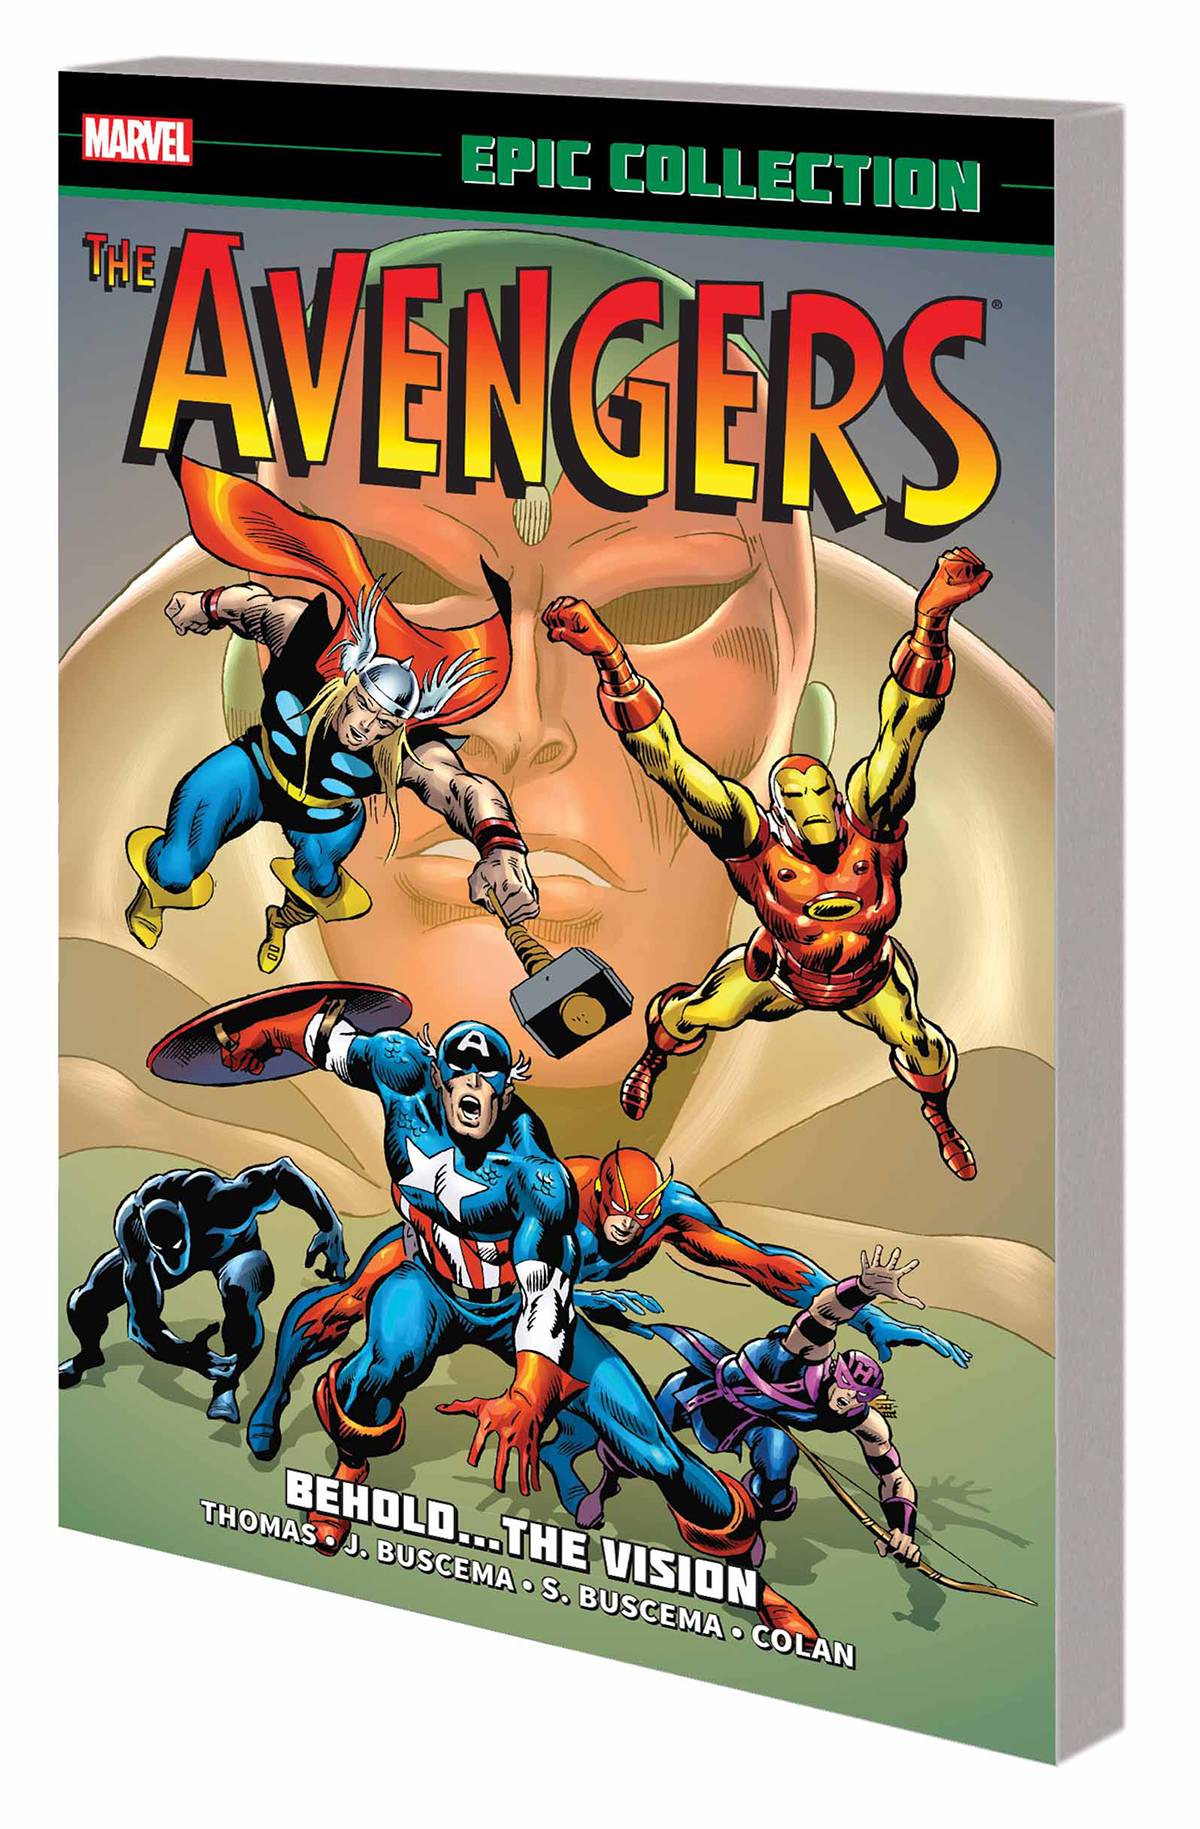 Avengers Epic Collection Graphic Novel Volume 4 Behold the Vision